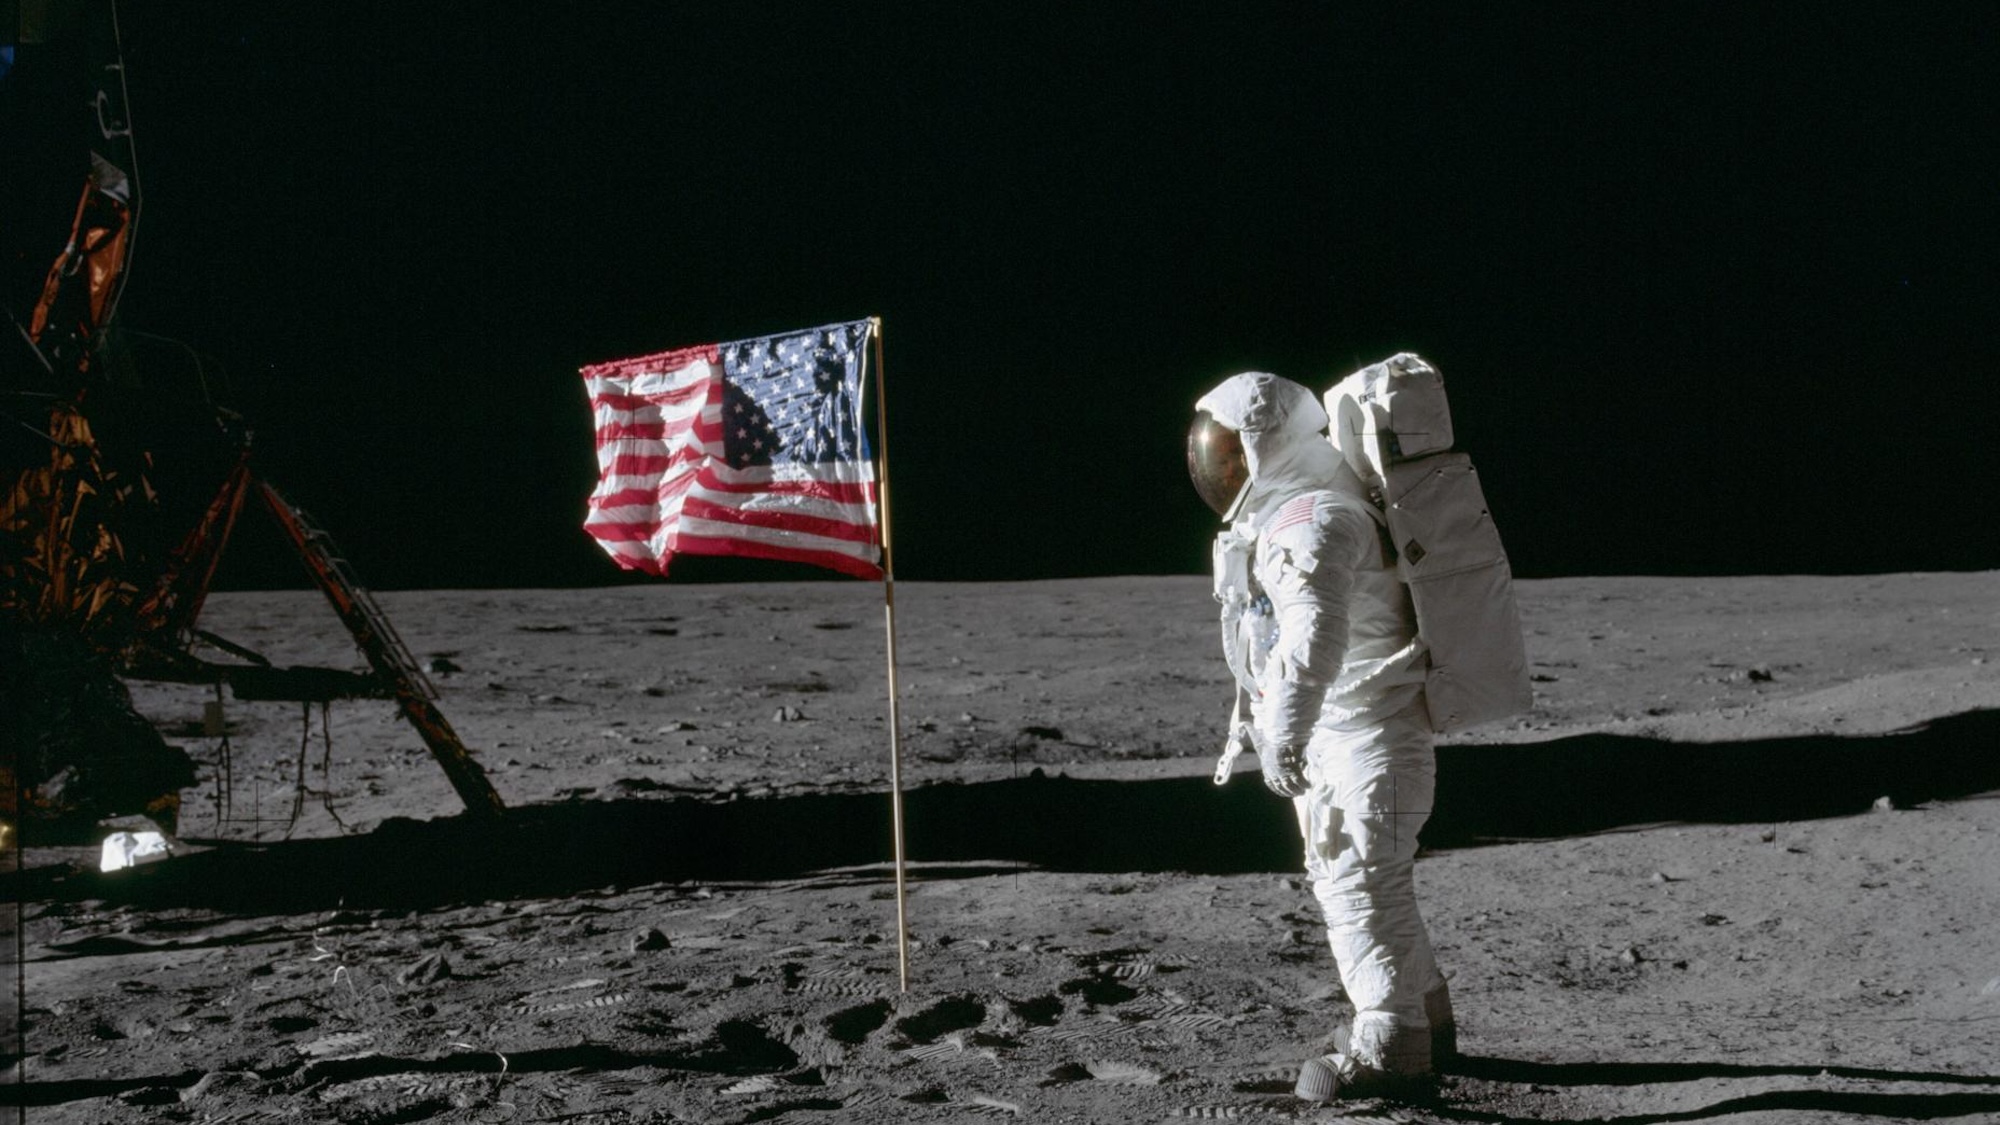 Buzz Aldrin on the moon next to American flag.